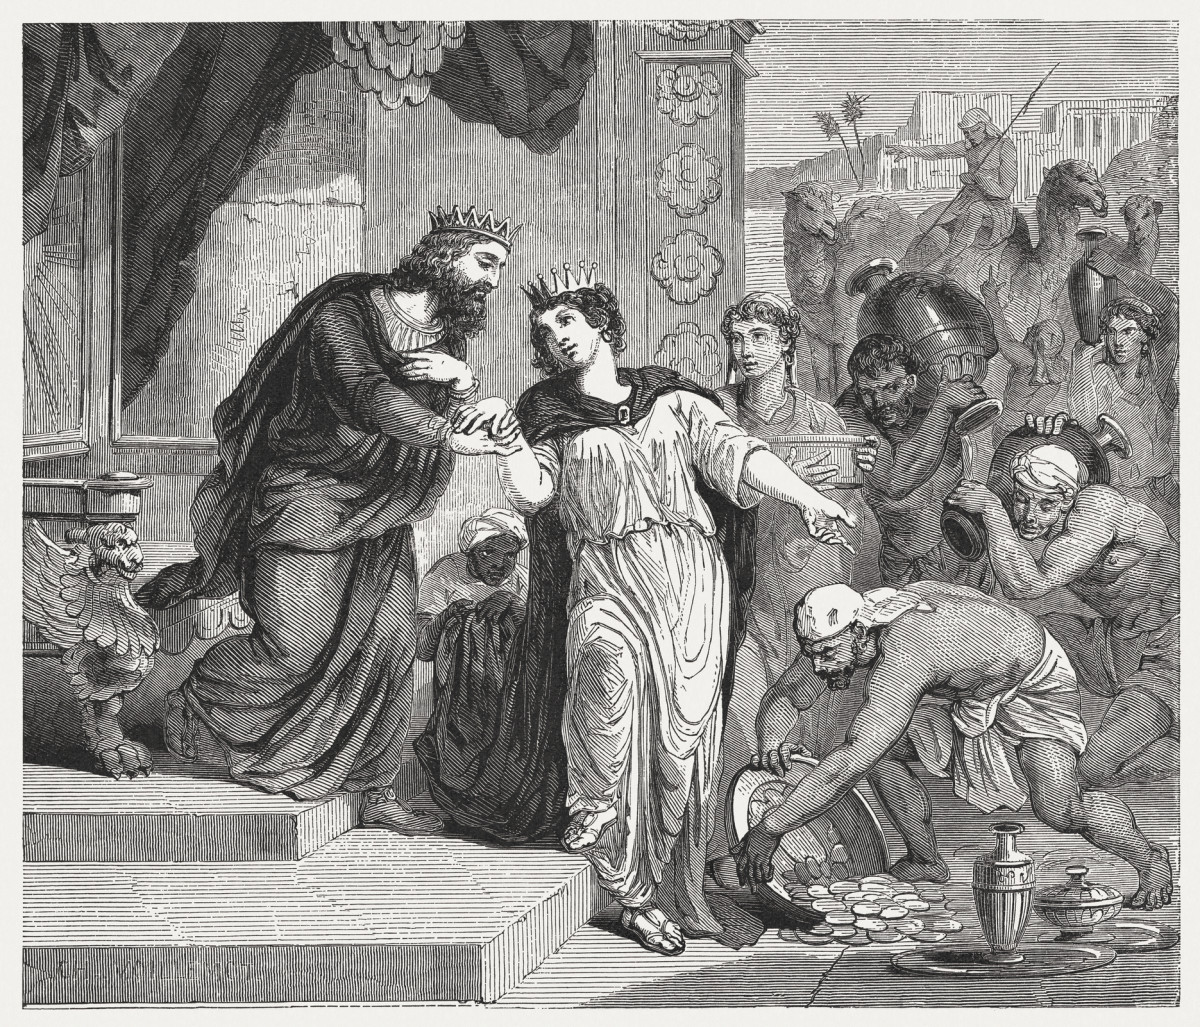 A wood engraving from 1886 depicts King Solomon receiving the Queen of Sheba.